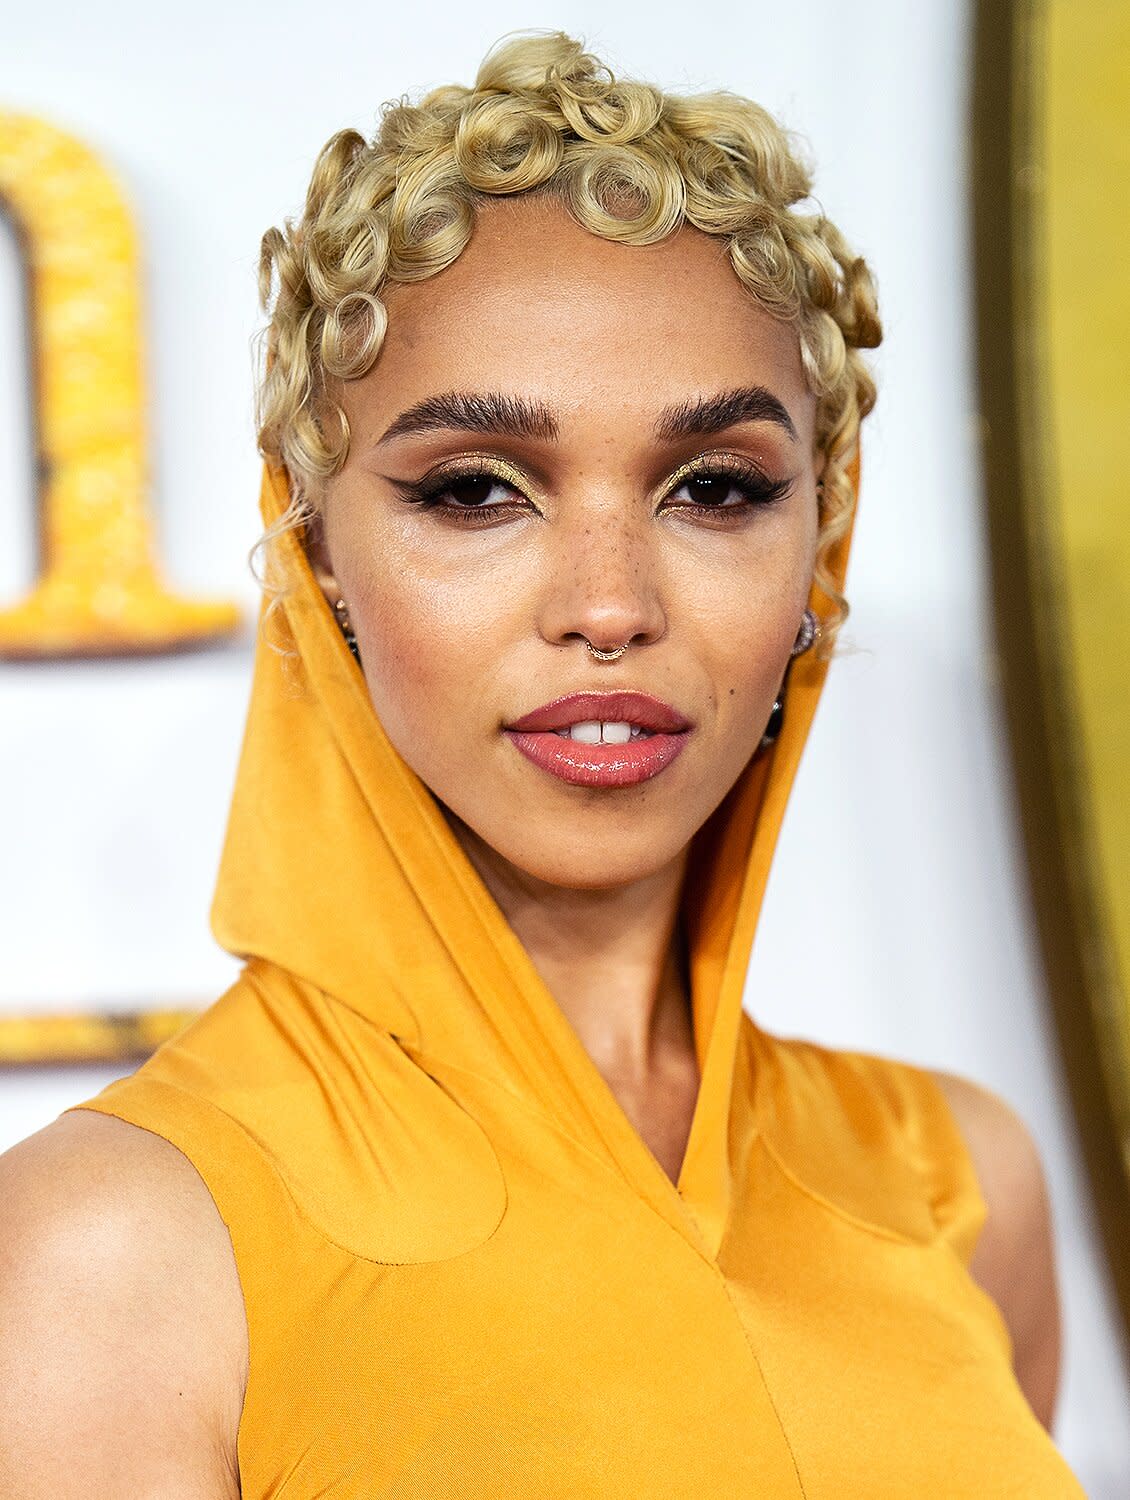 FKA Twigs attends the World Premiere of "The King's Man" at Cineworld Leicester Square on December 06, 2021 in London, England.